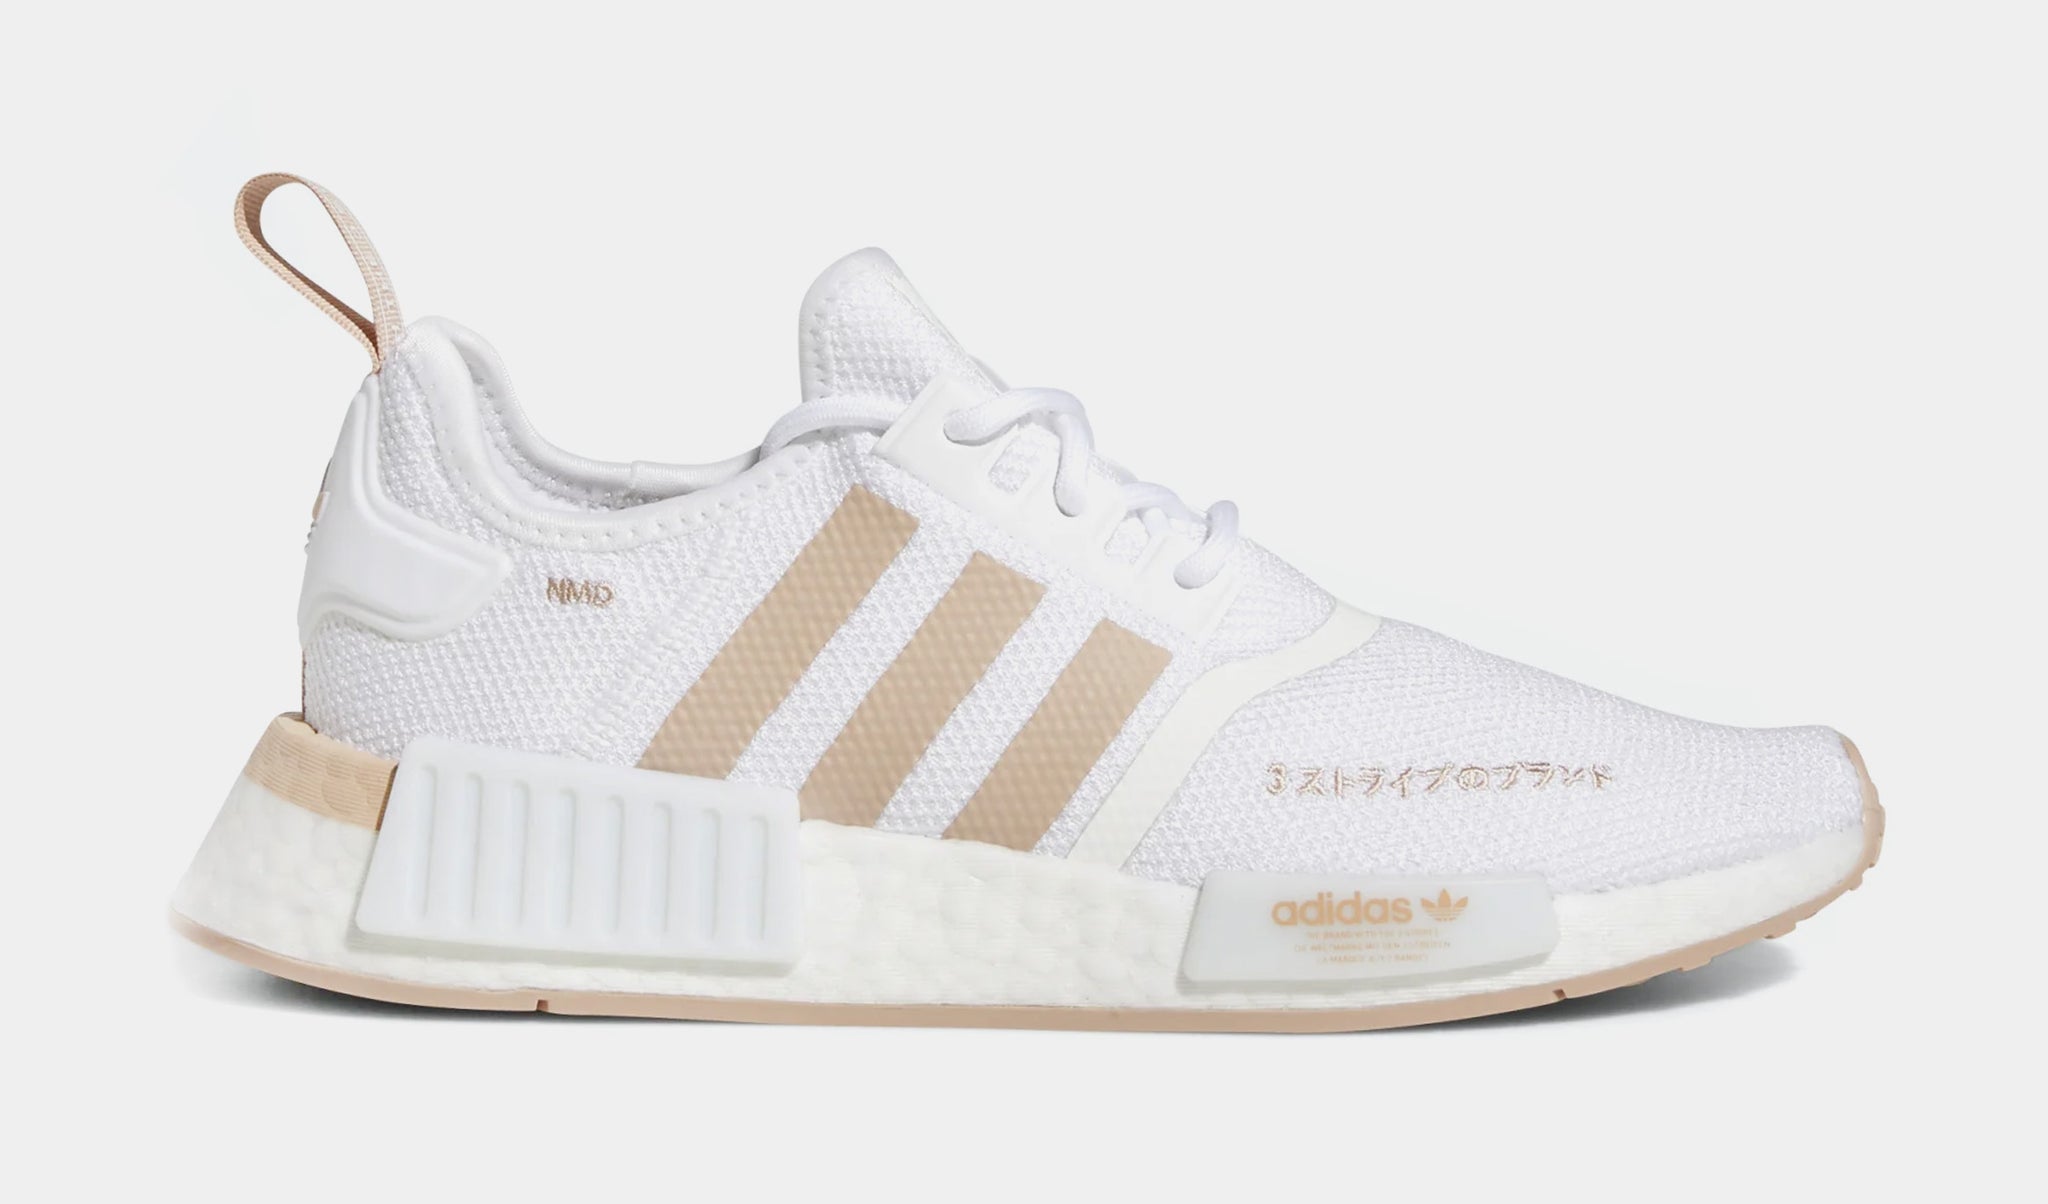 Humanistisch bewondering Verkeersopstopping adidas NMD R1 Womens Lifestyle Shoes White Beige HQ2071 – Shoe Palace